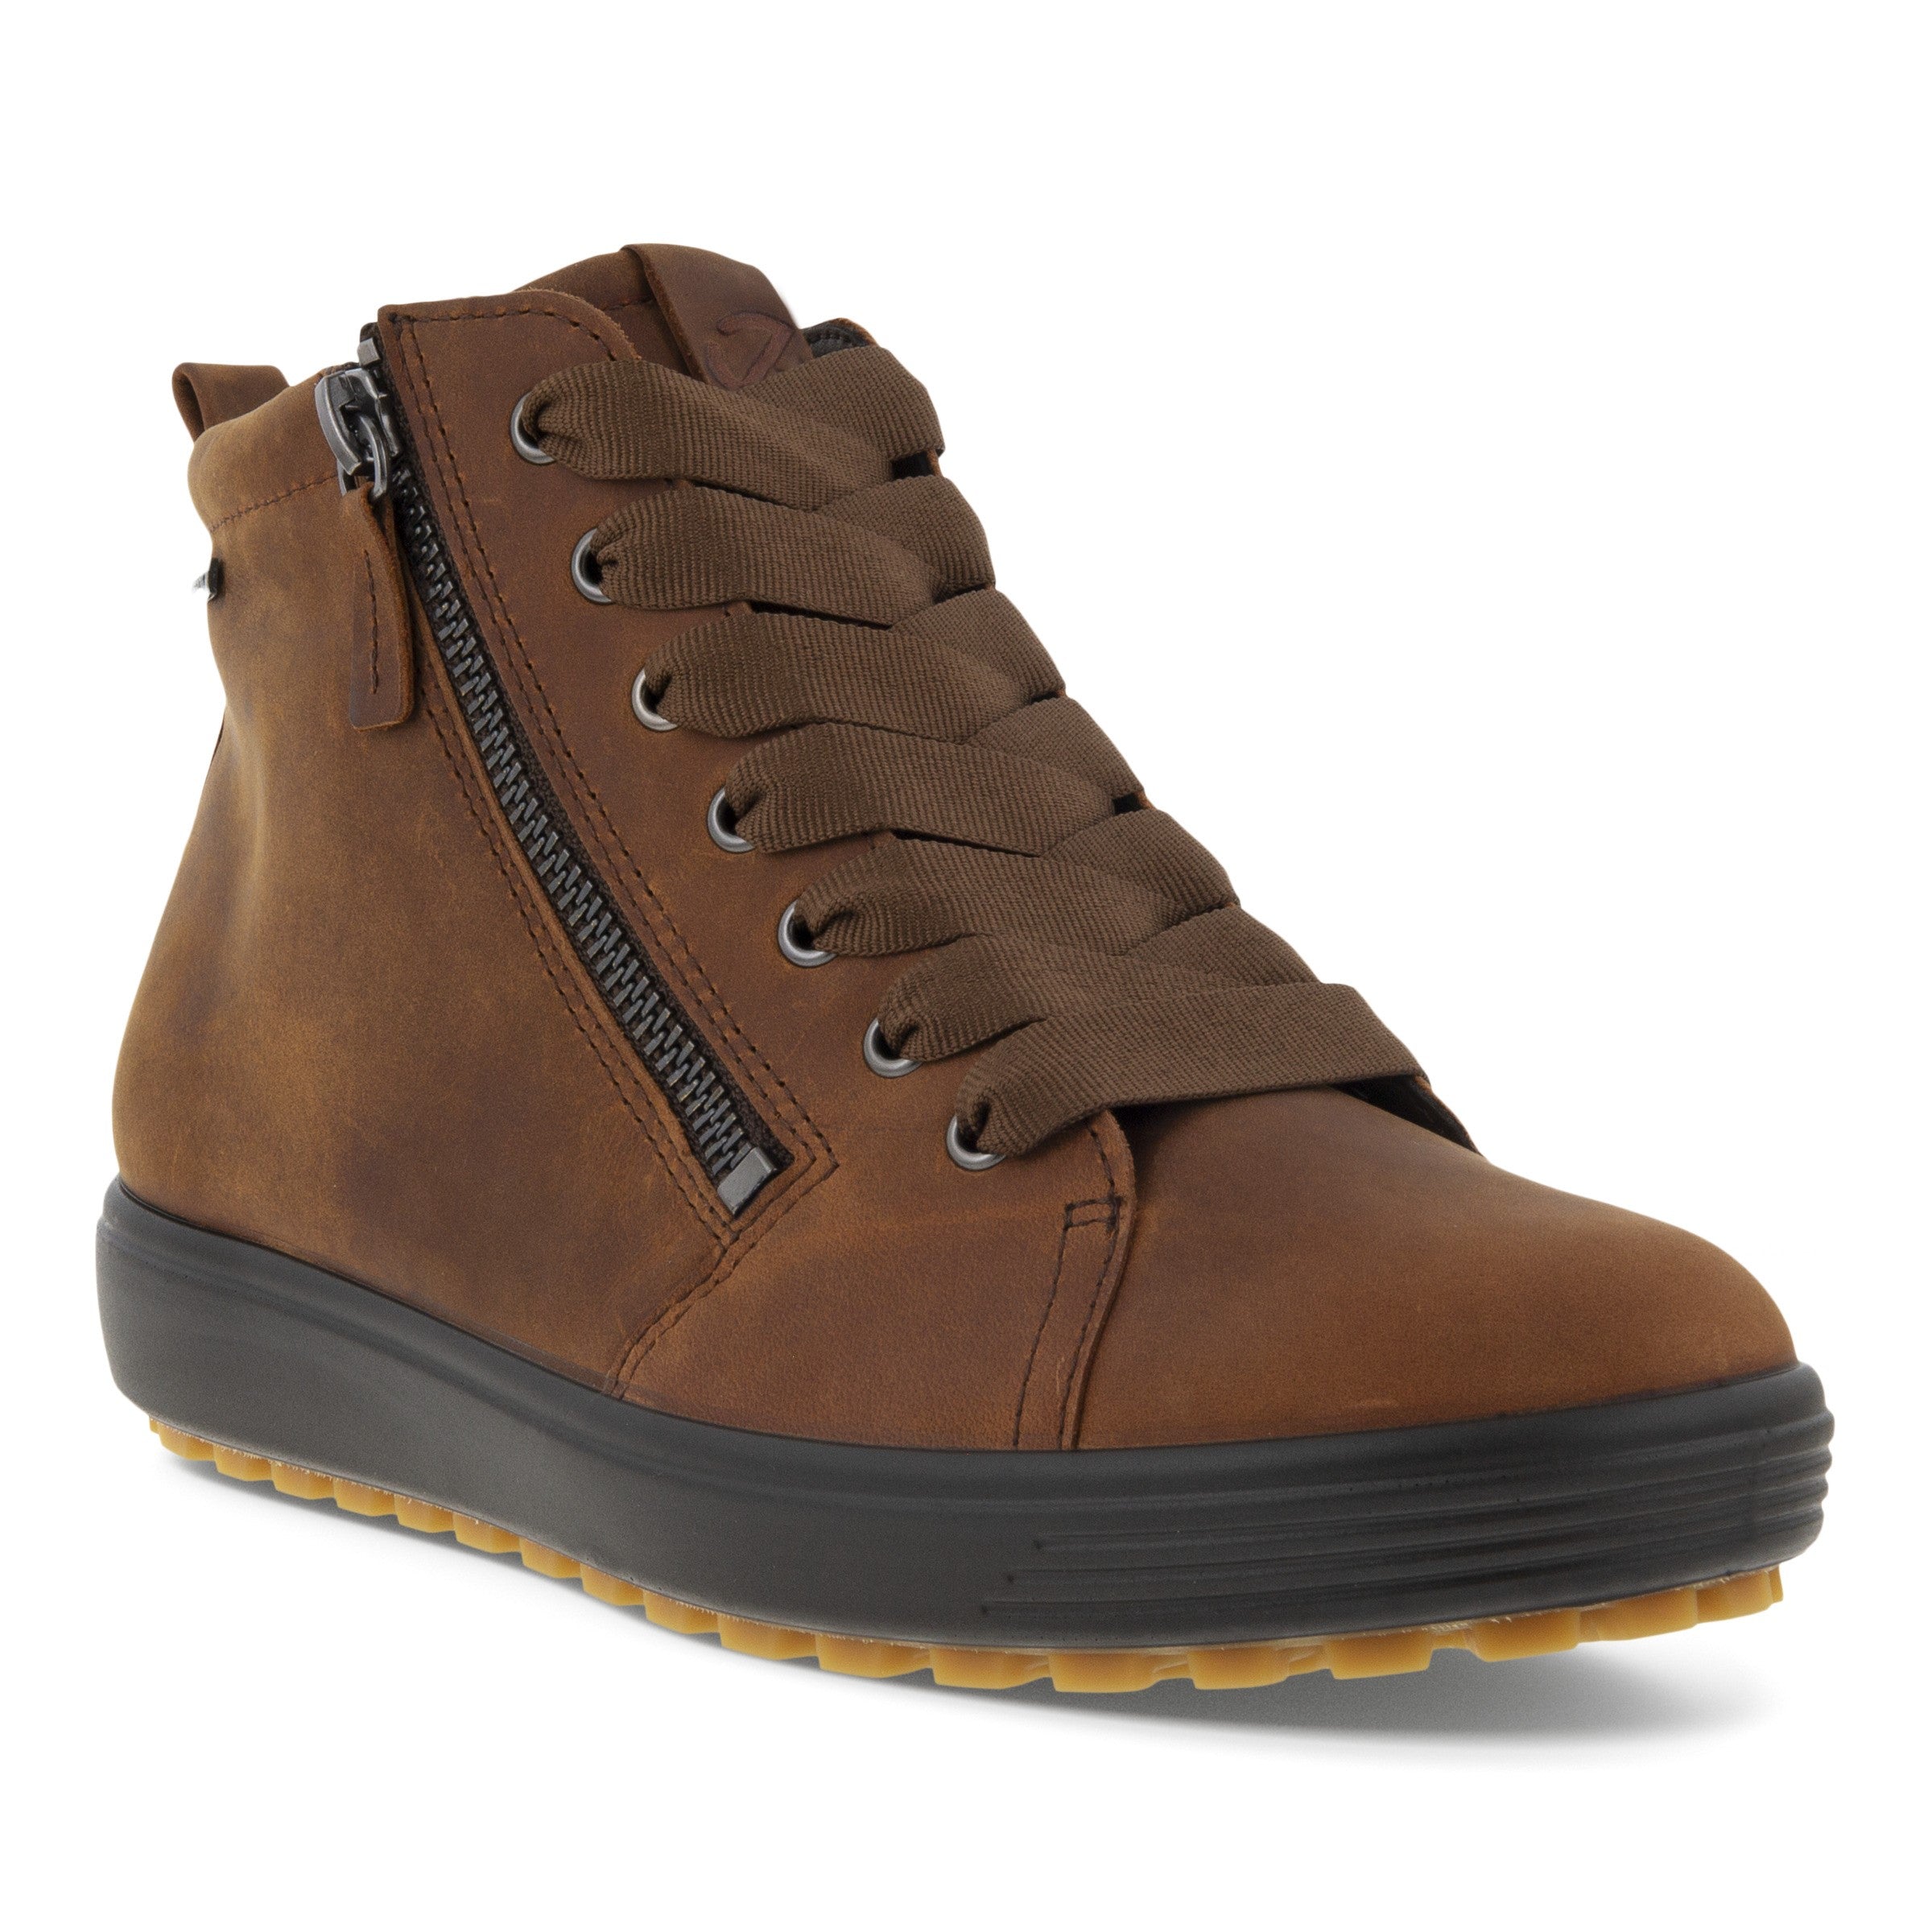 Ecco Soft 7 Tred GTX Hi 450163 02671 Ladies Sierra Brown Nubuck Waterproof Arch Support Zip & Lace Ankle Boots